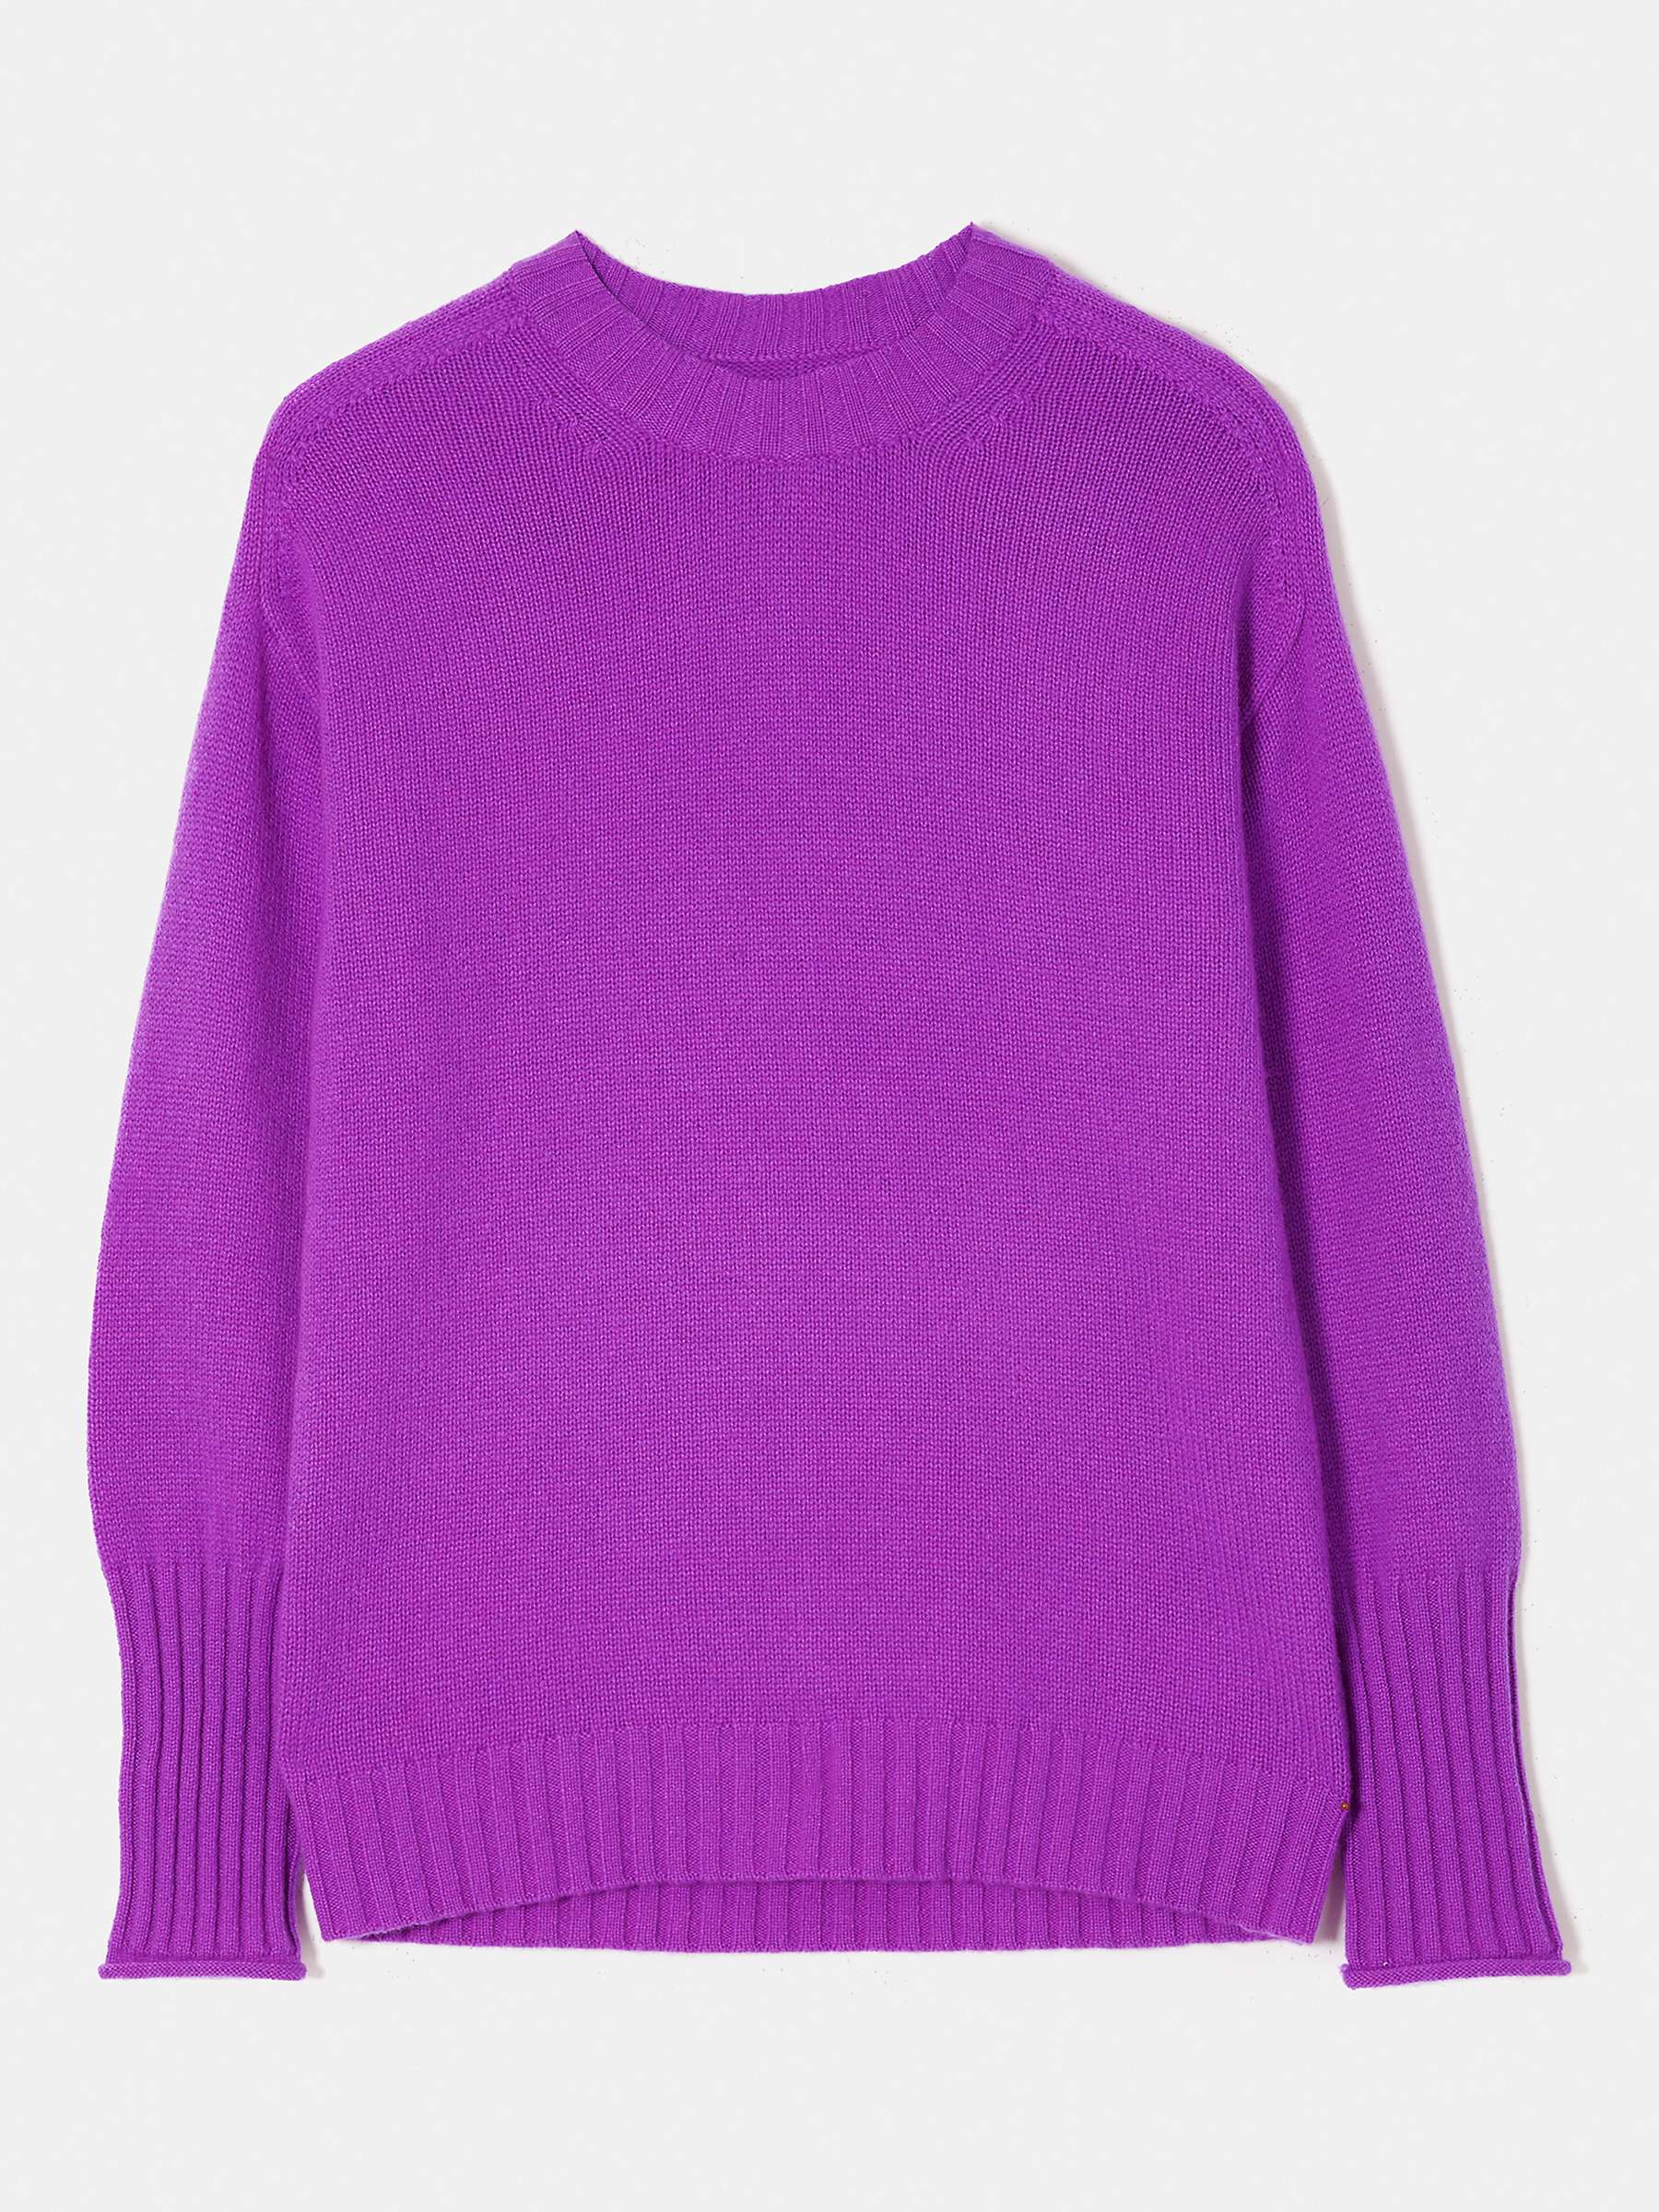 Jigsaw Cashmere Relaxed Crew Jumper, Purple at John Lewis & Partners